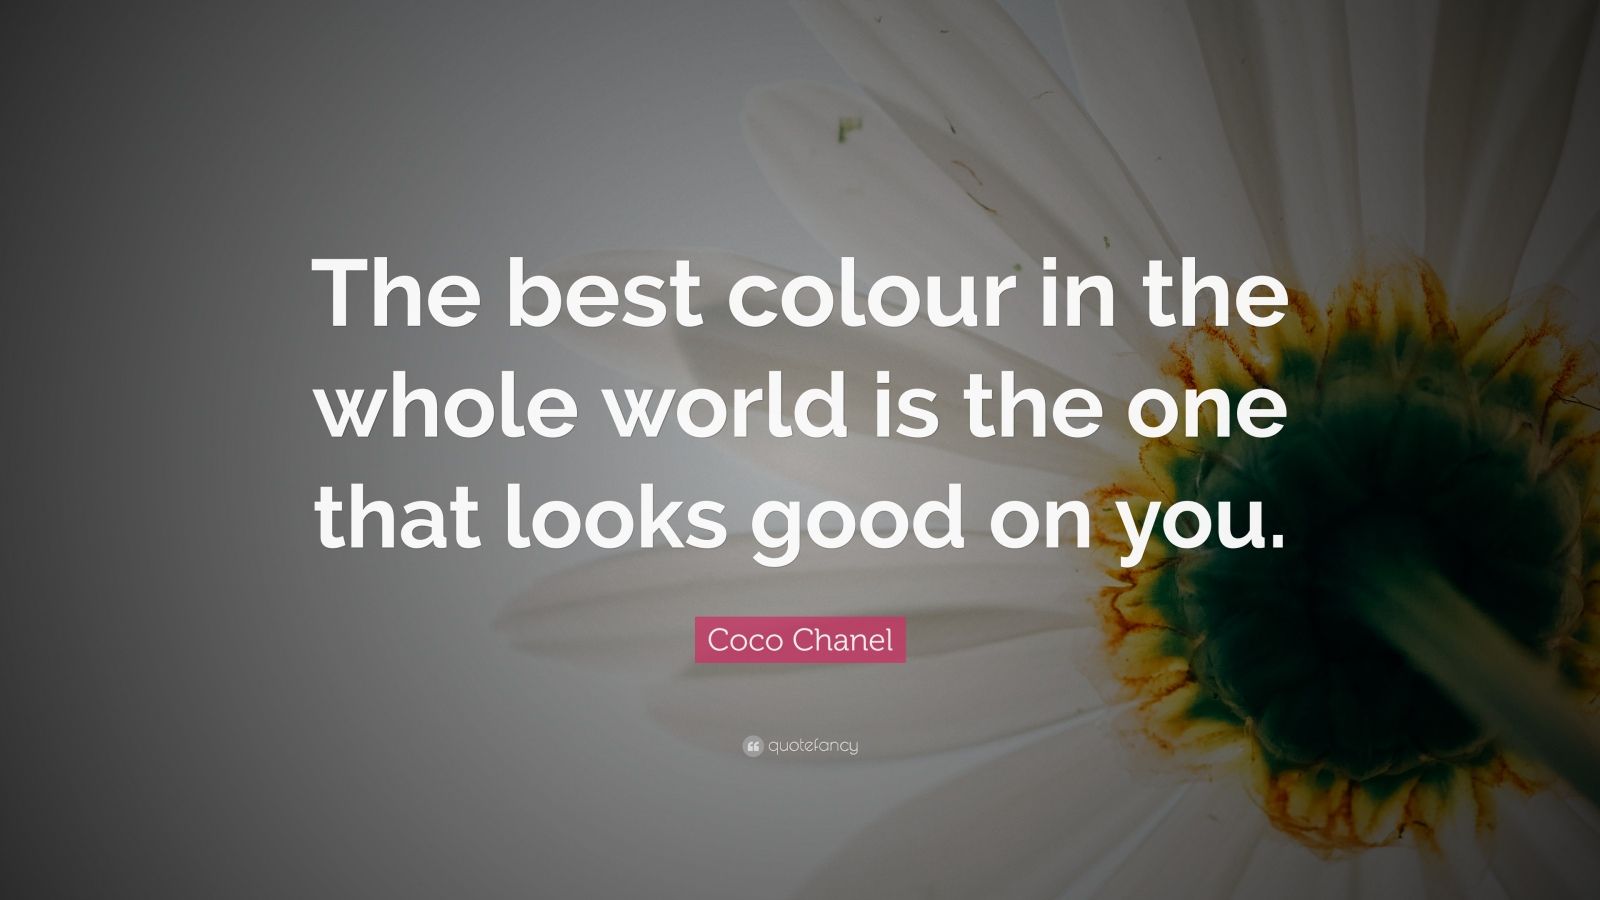 #WiseWednesday “The best color in the whole world is the one that looks good  on you.” — Coco Chanel